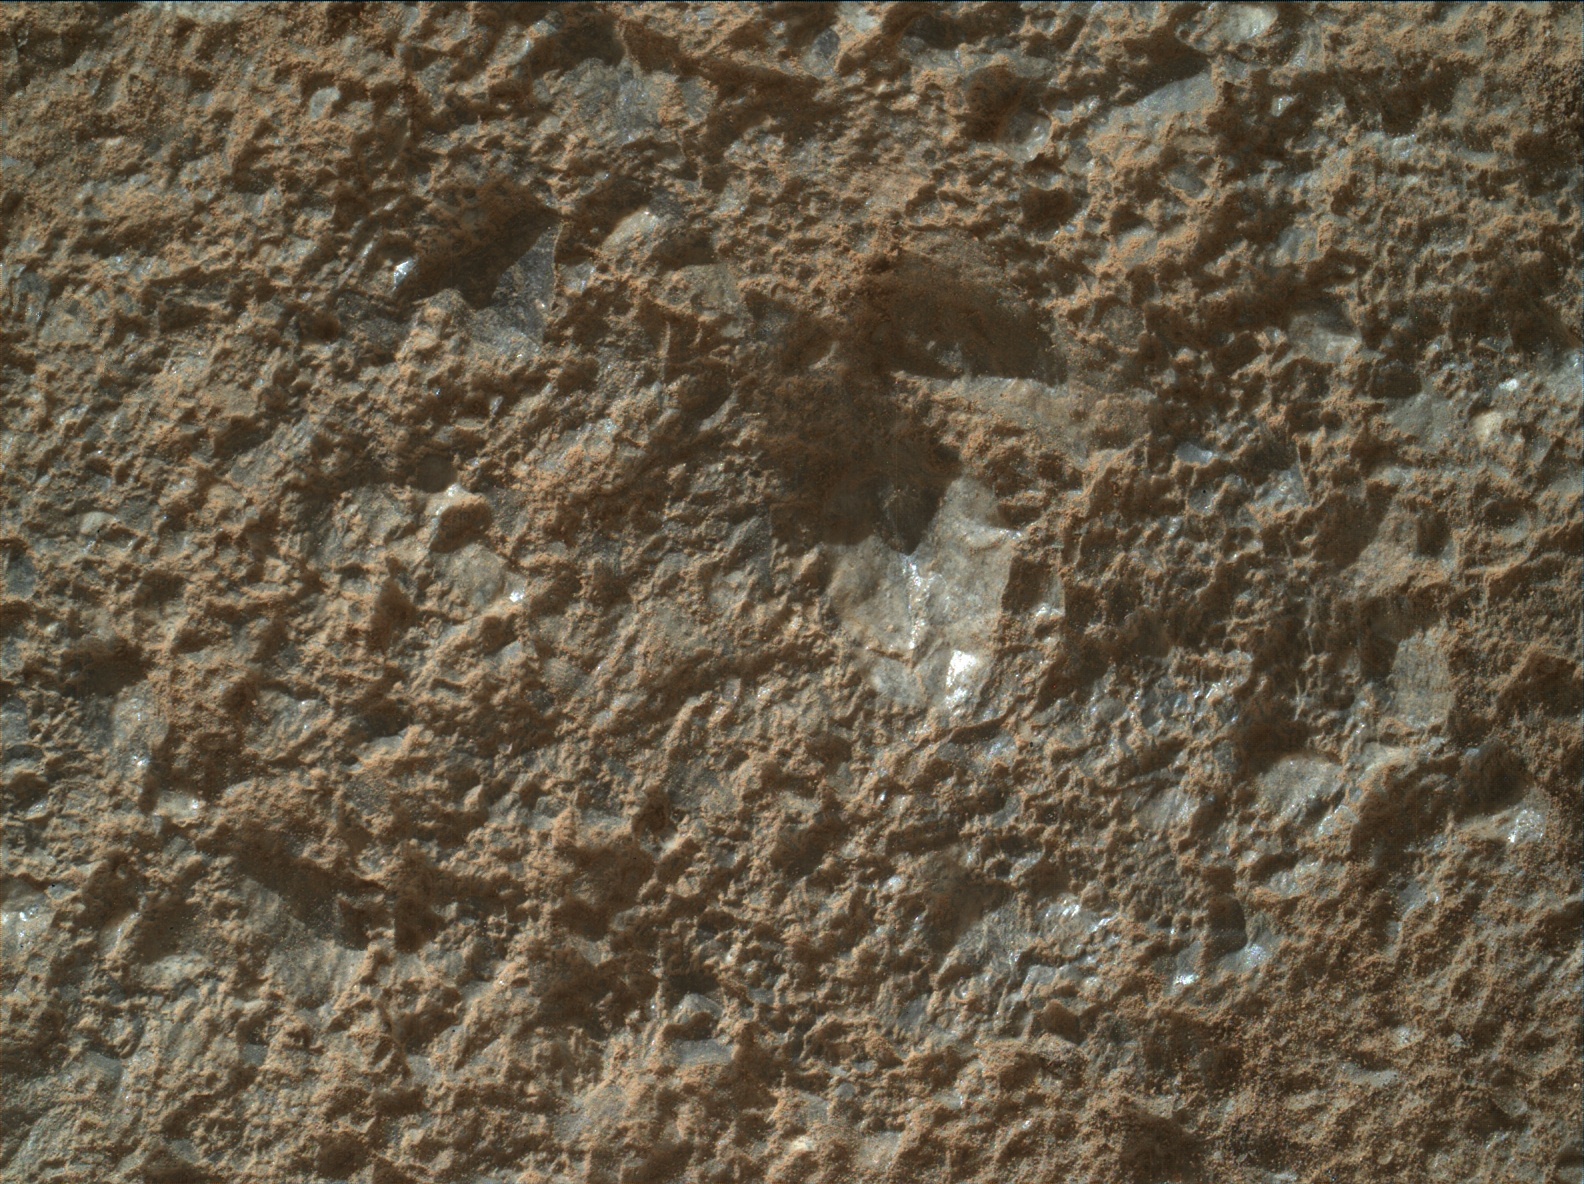 Nasa's Mars rover Curiosity acquired this image using its Mars Hand Lens Imager (MAHLI) on Sol 2023